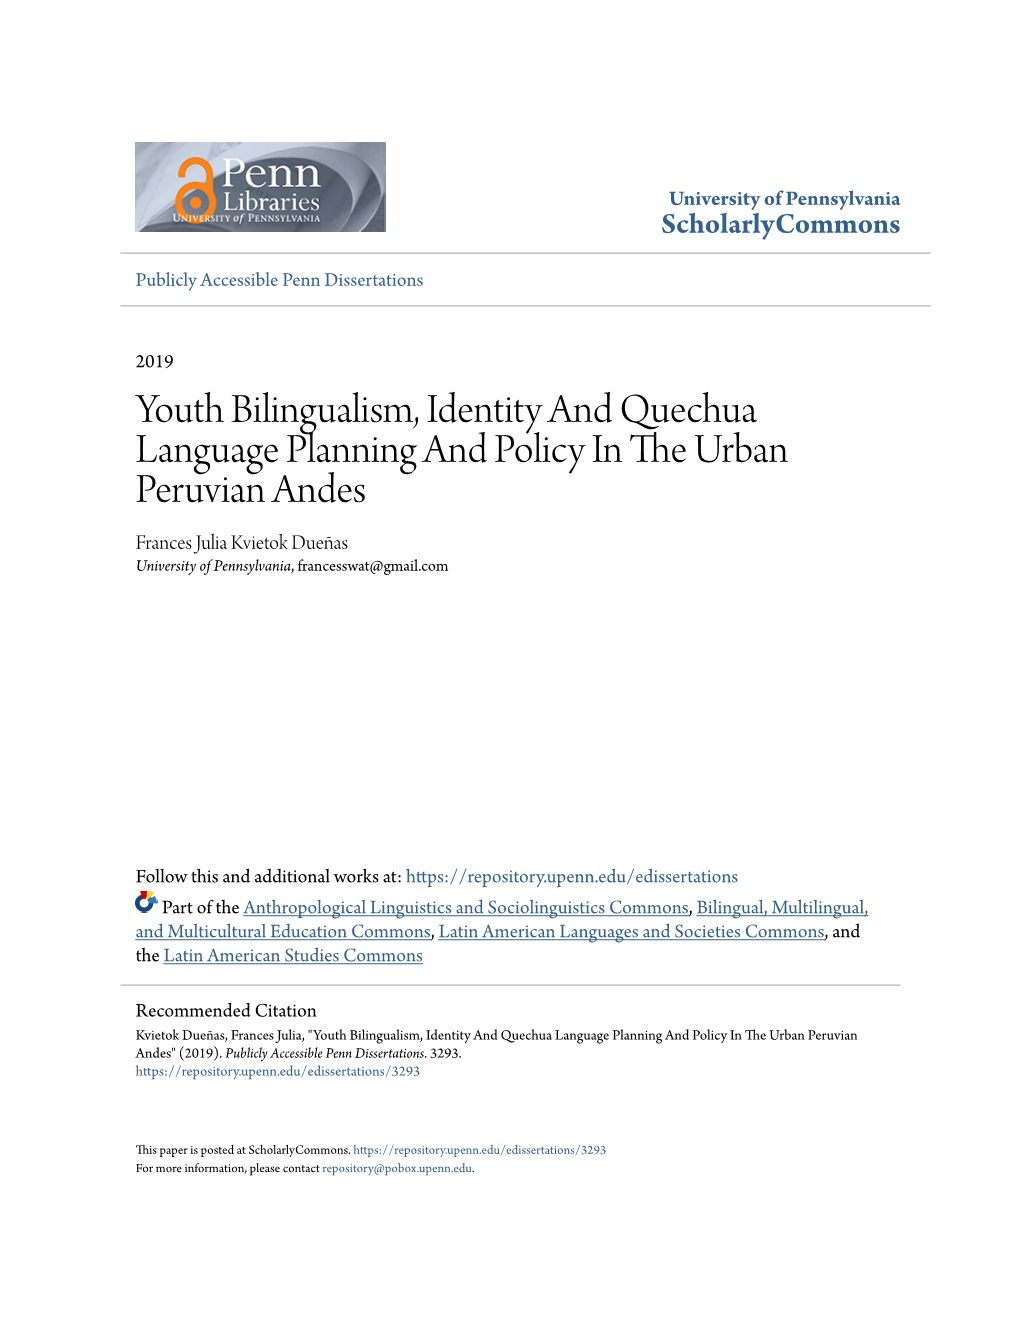 Youth Bilingualism, Identity and Quechua Language Planning And